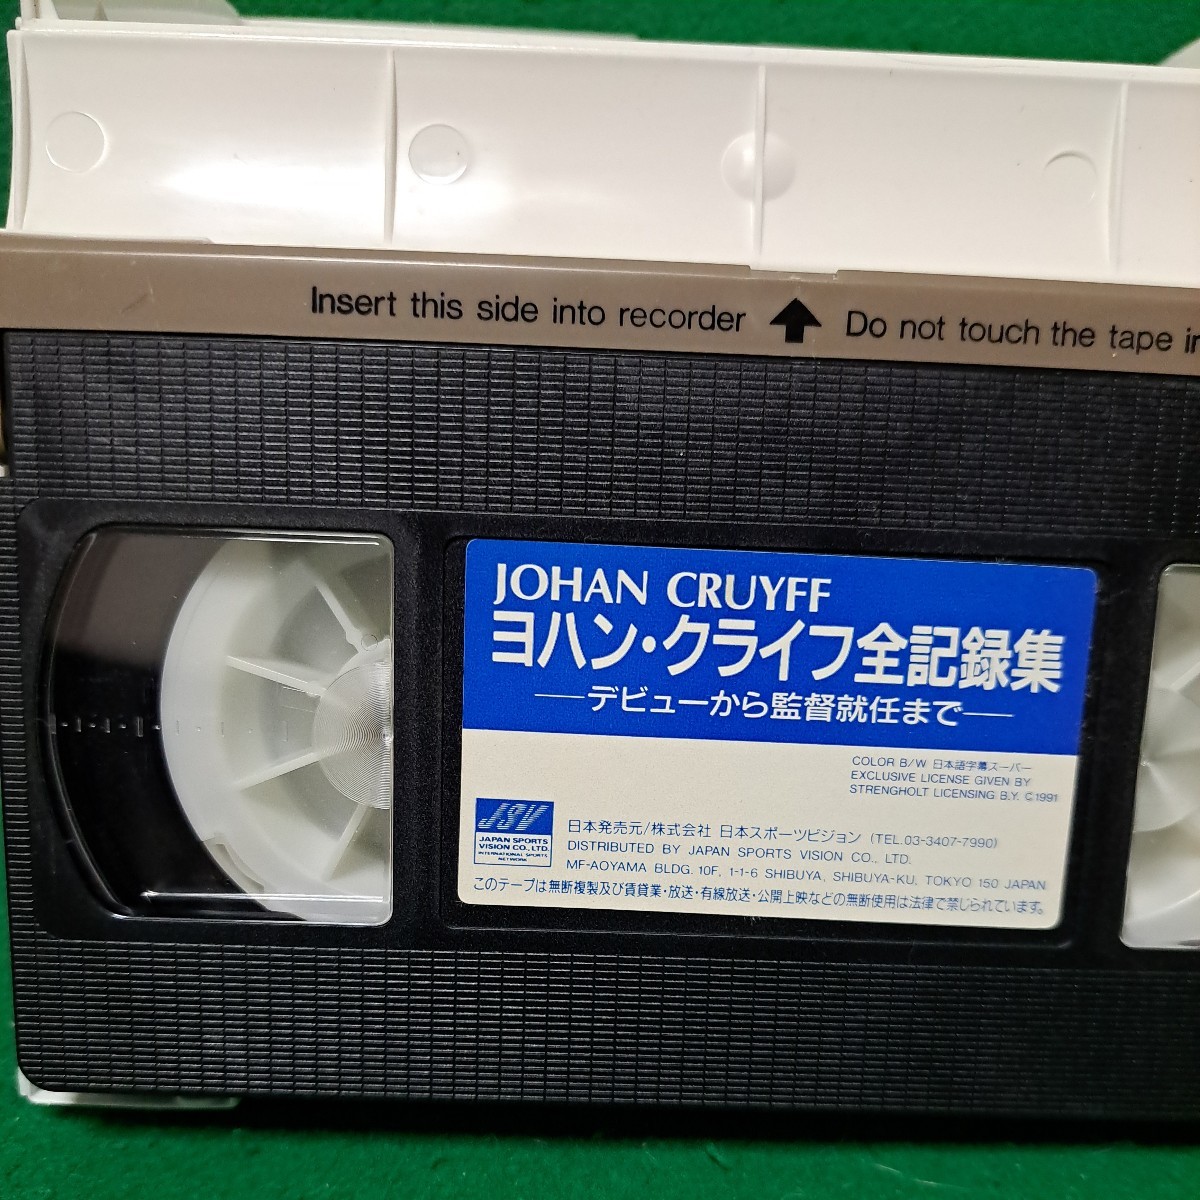  Johan *k life all record compilation VHS ~ debut from direction .. till ~ postage 510 jpy 